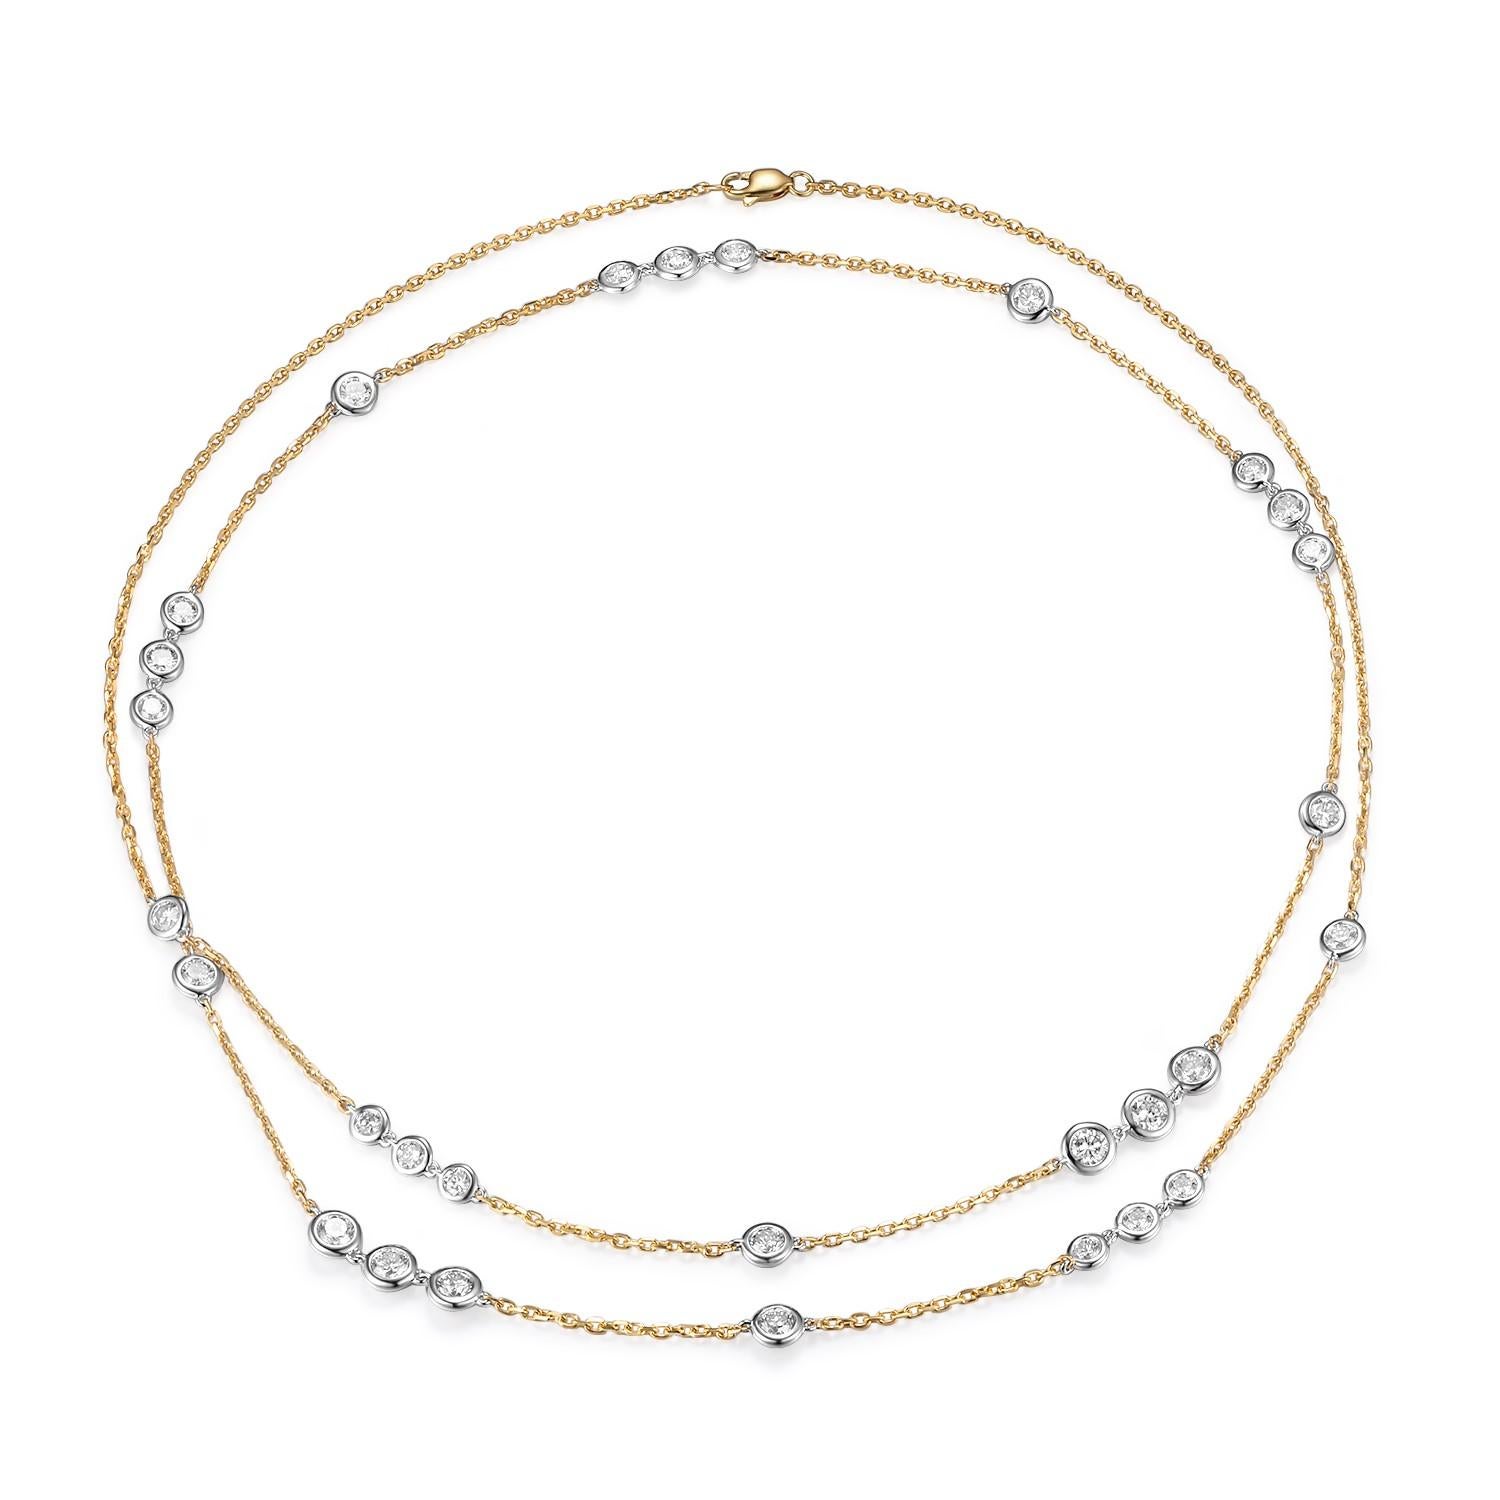 The 4.12 Carat 29-Station Diamond by the Yard Necklace is a breathtaking piece of jewelry that exudes elegance and sophistication. Crafted with meticulous attention to detail, this necklace features a total weight of 4.12 carats of dazzling diamonds